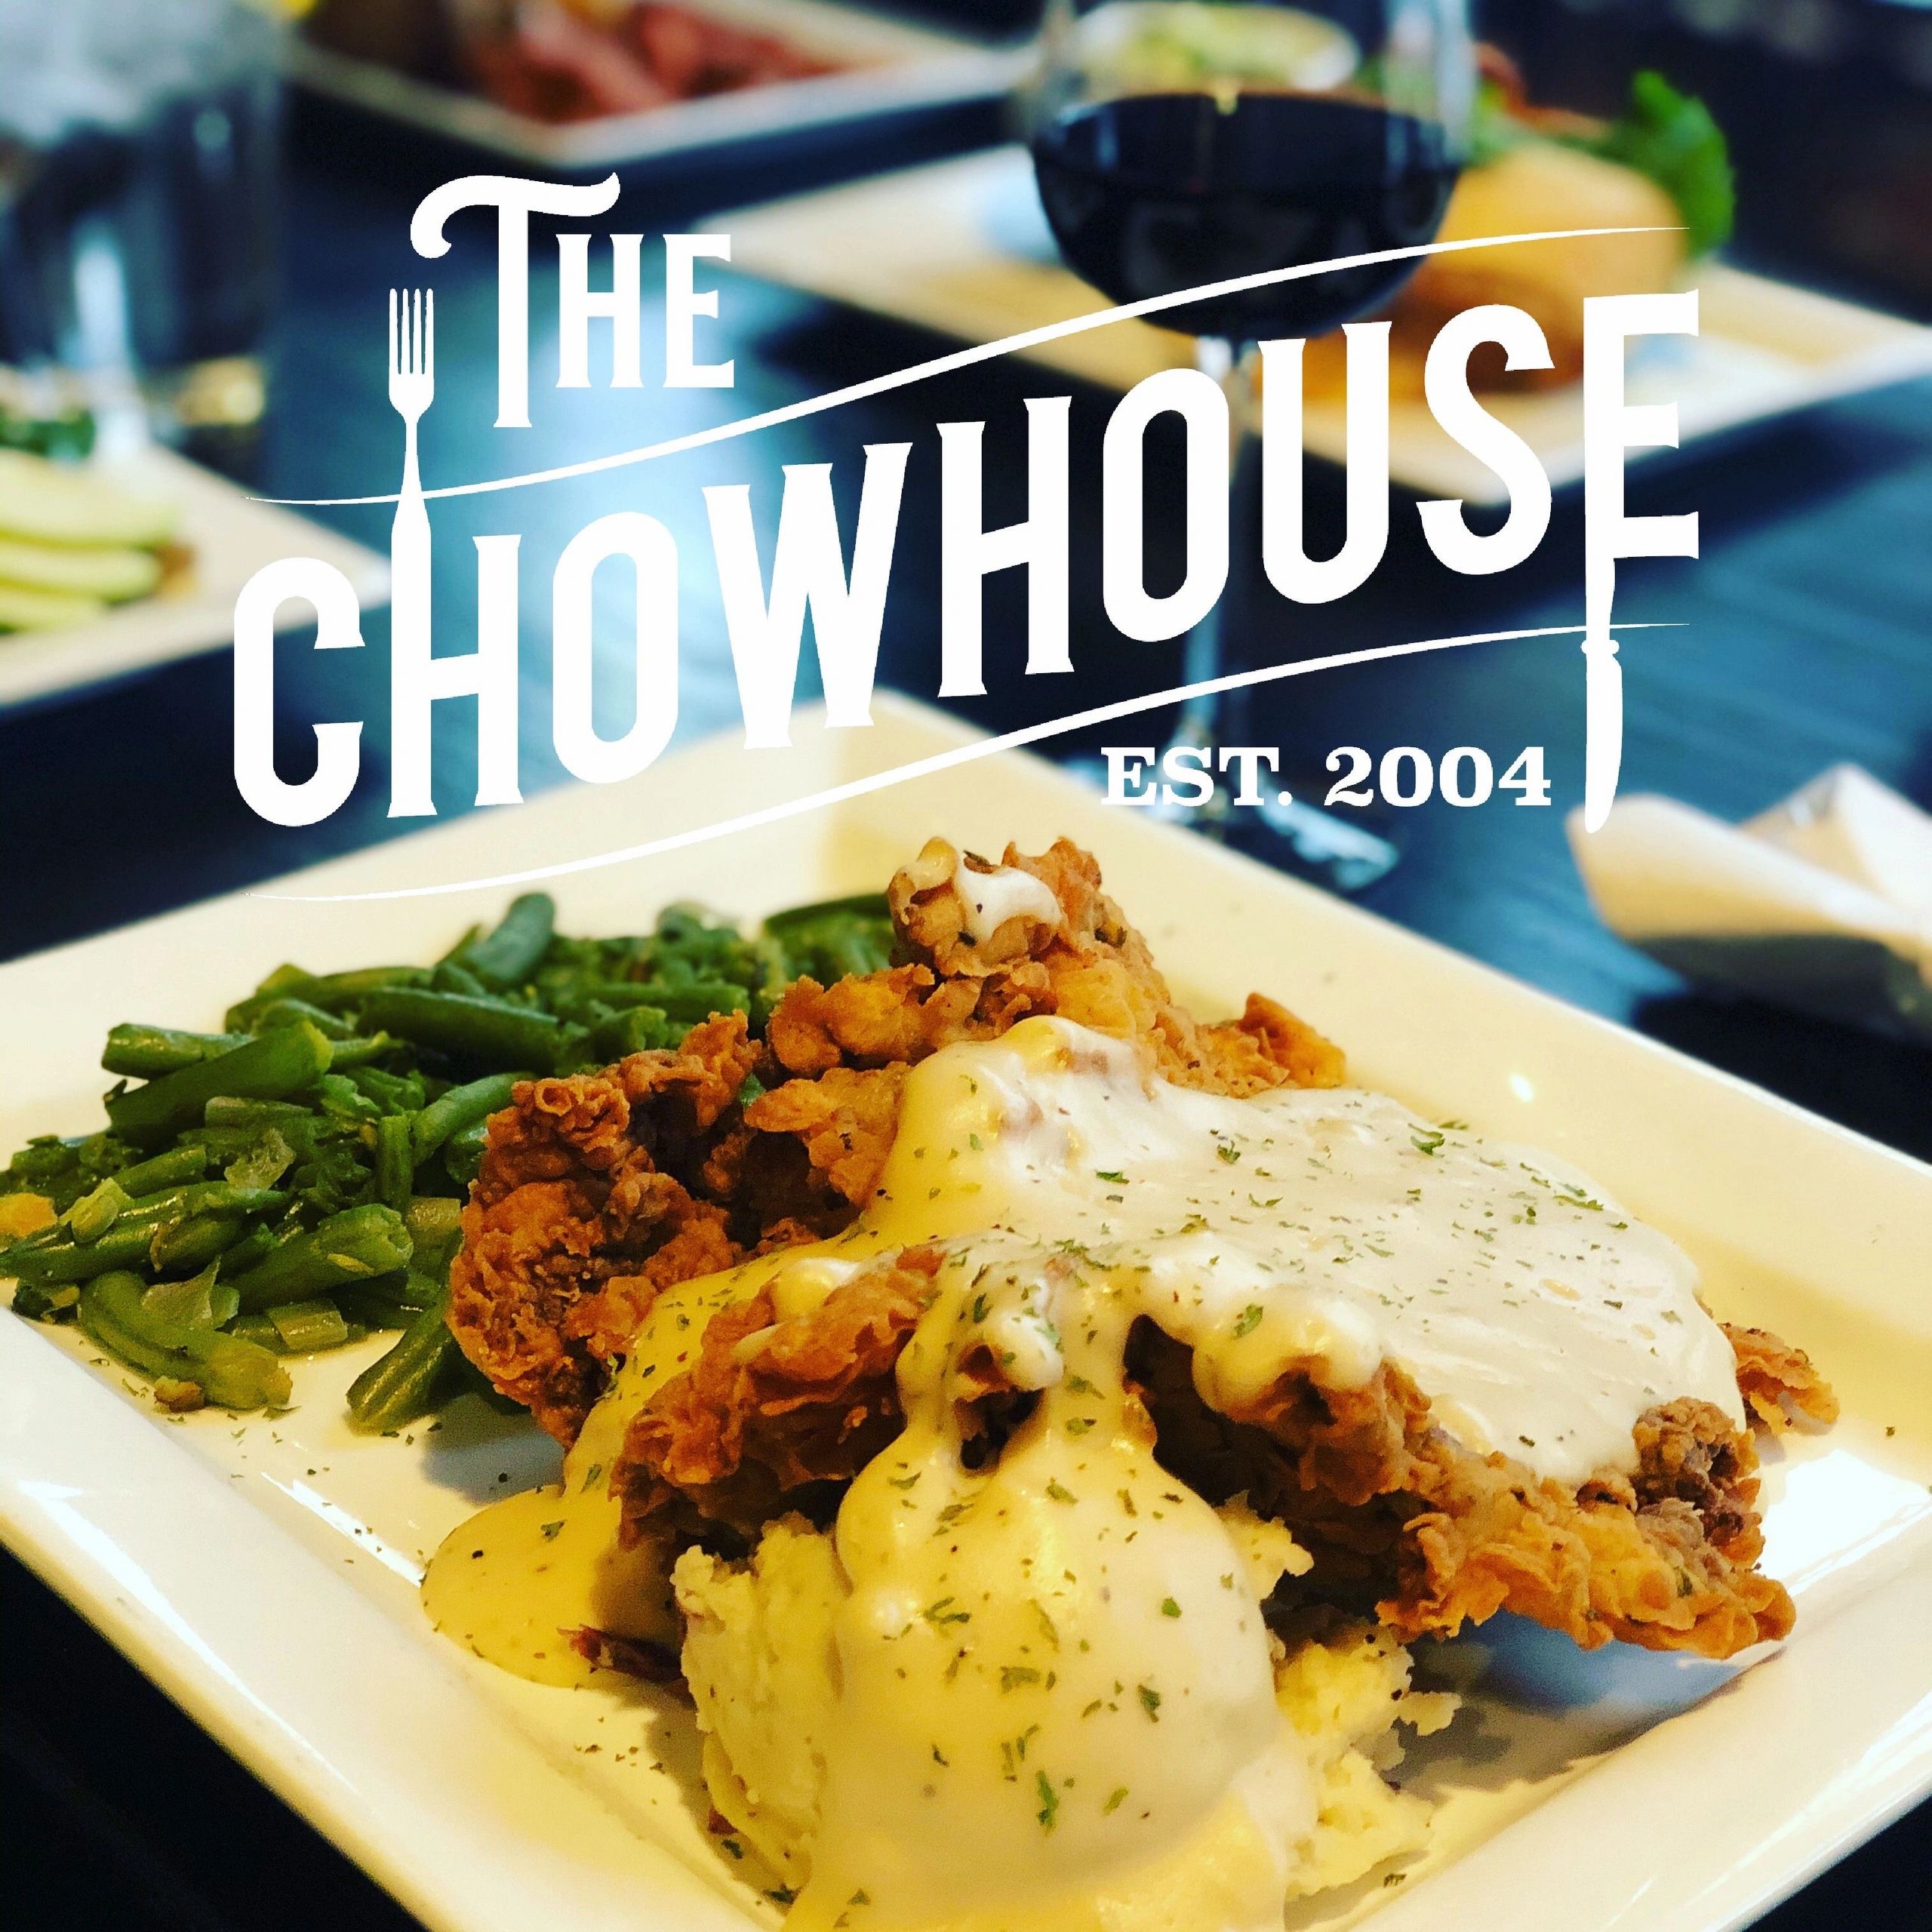 thechowhouse.com